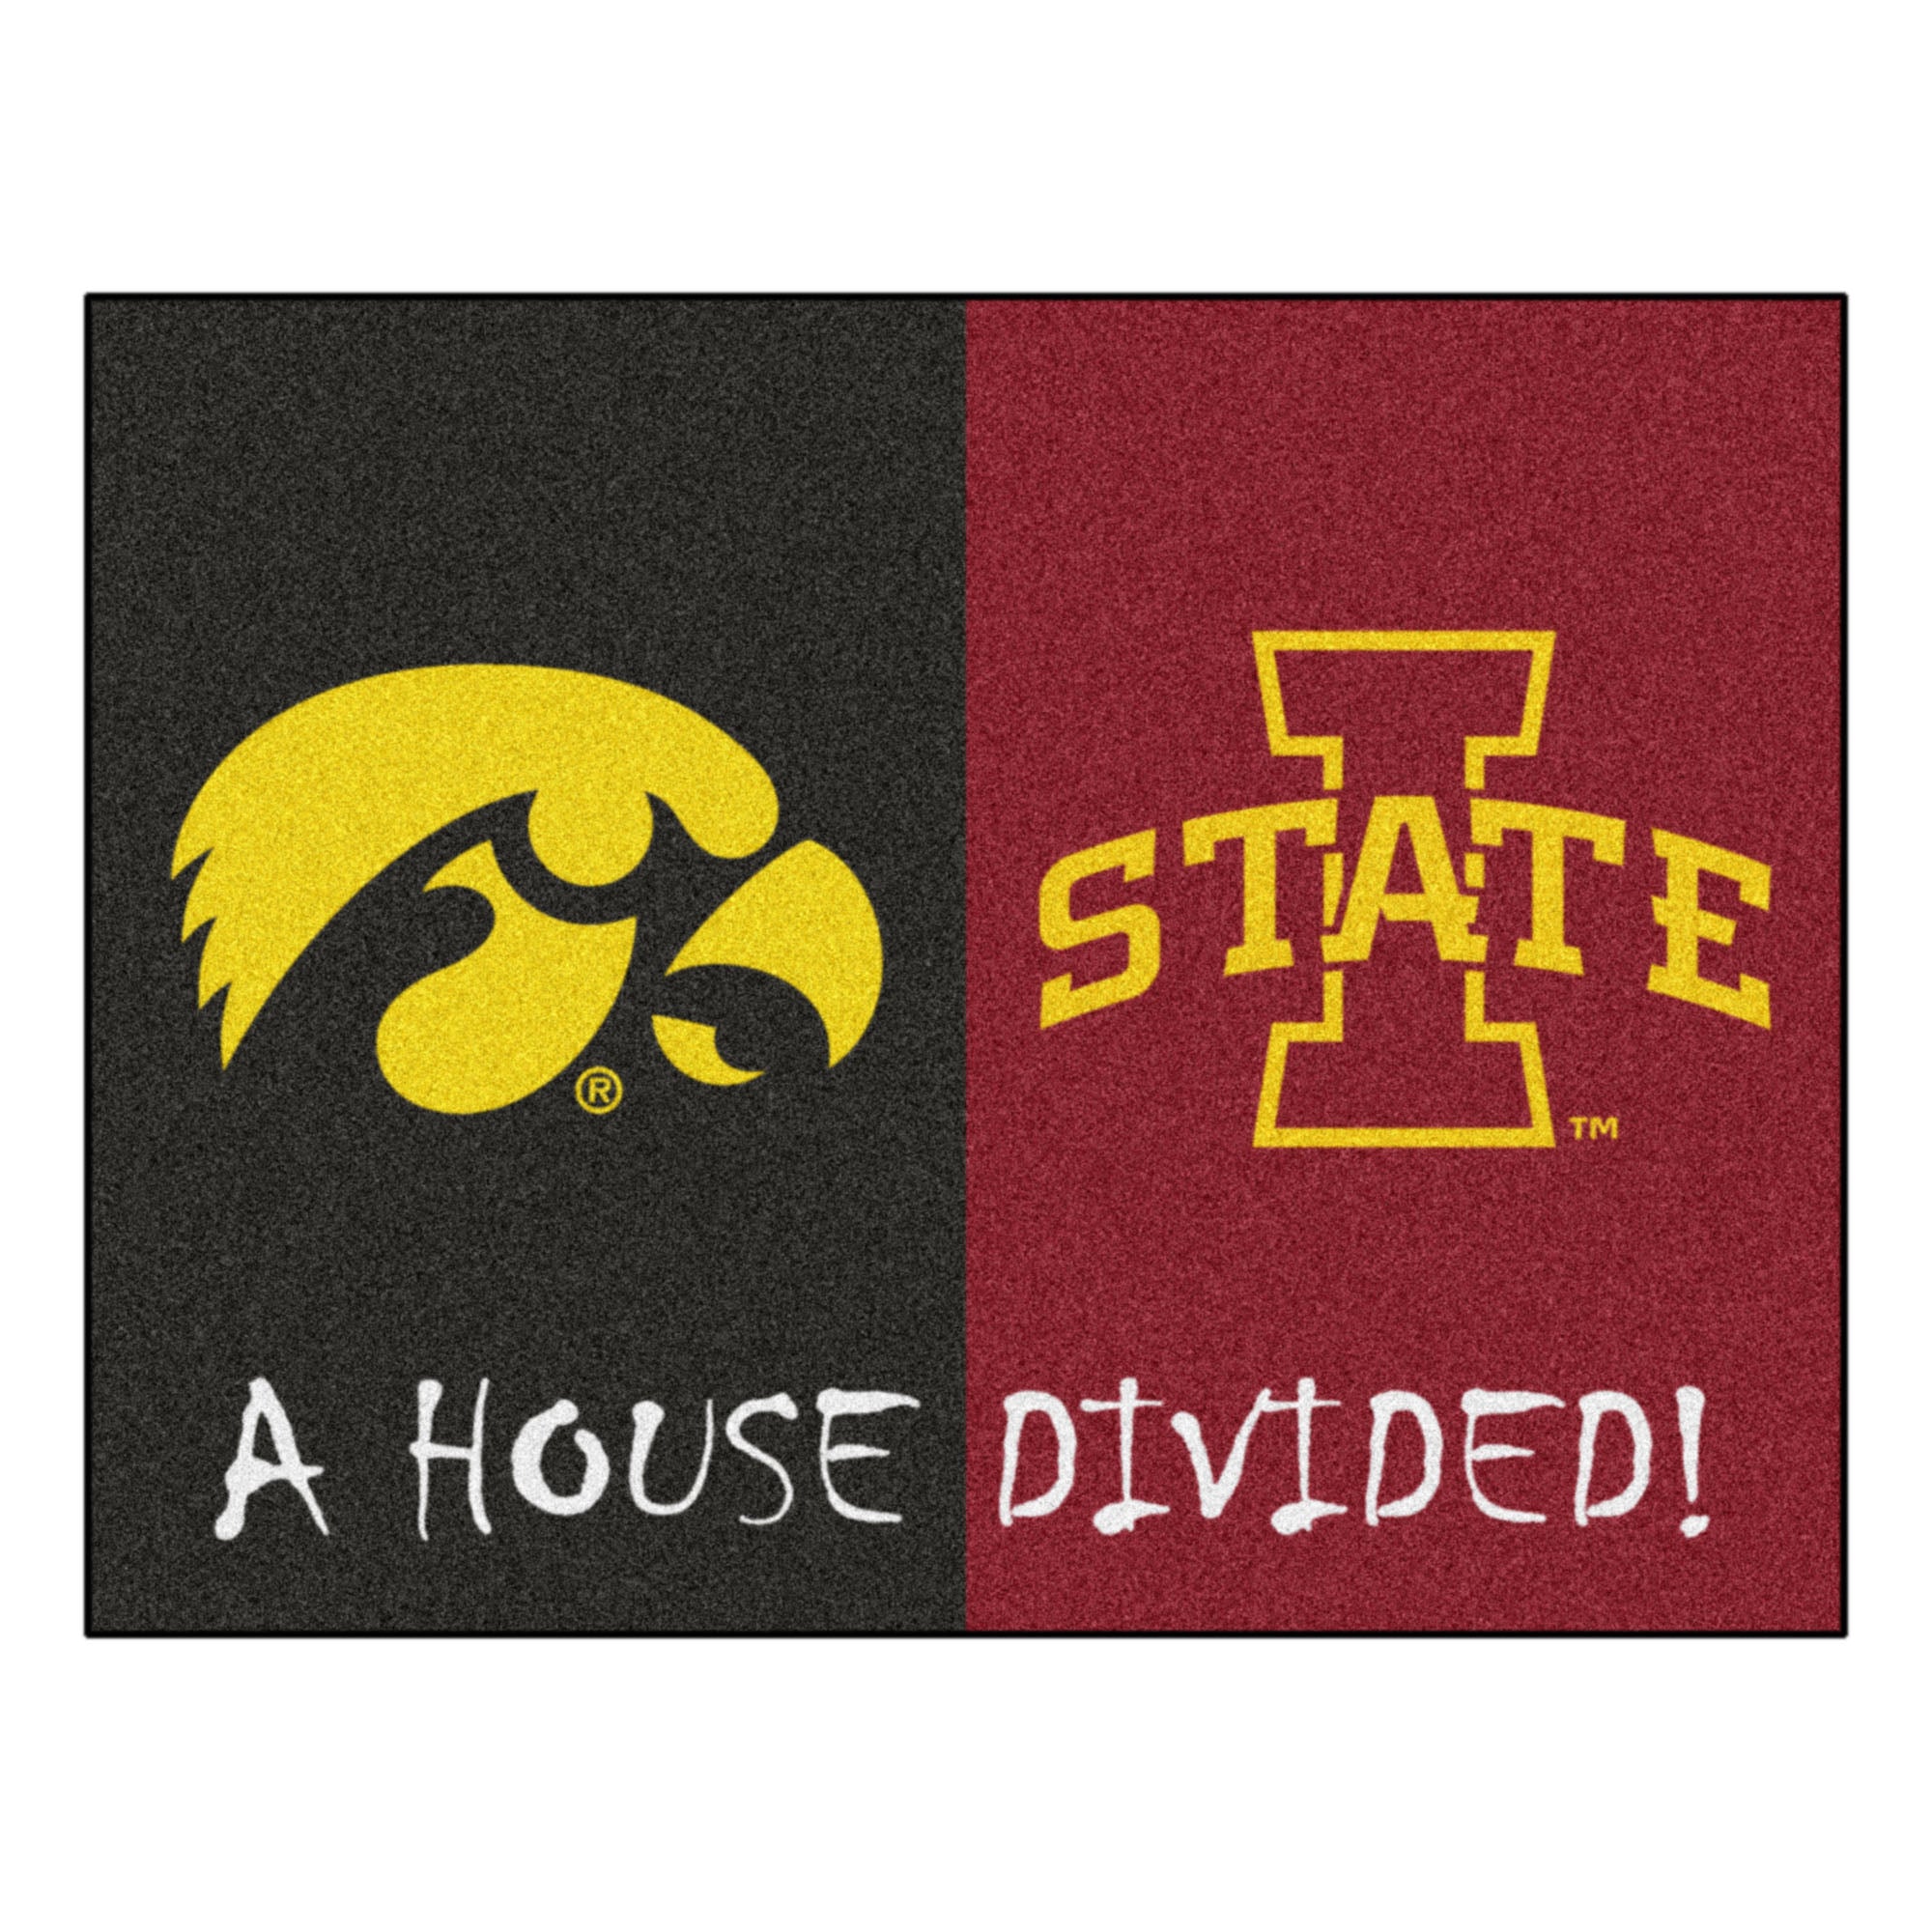 Fanmat - House divided - iowa / iowa state house divided mat